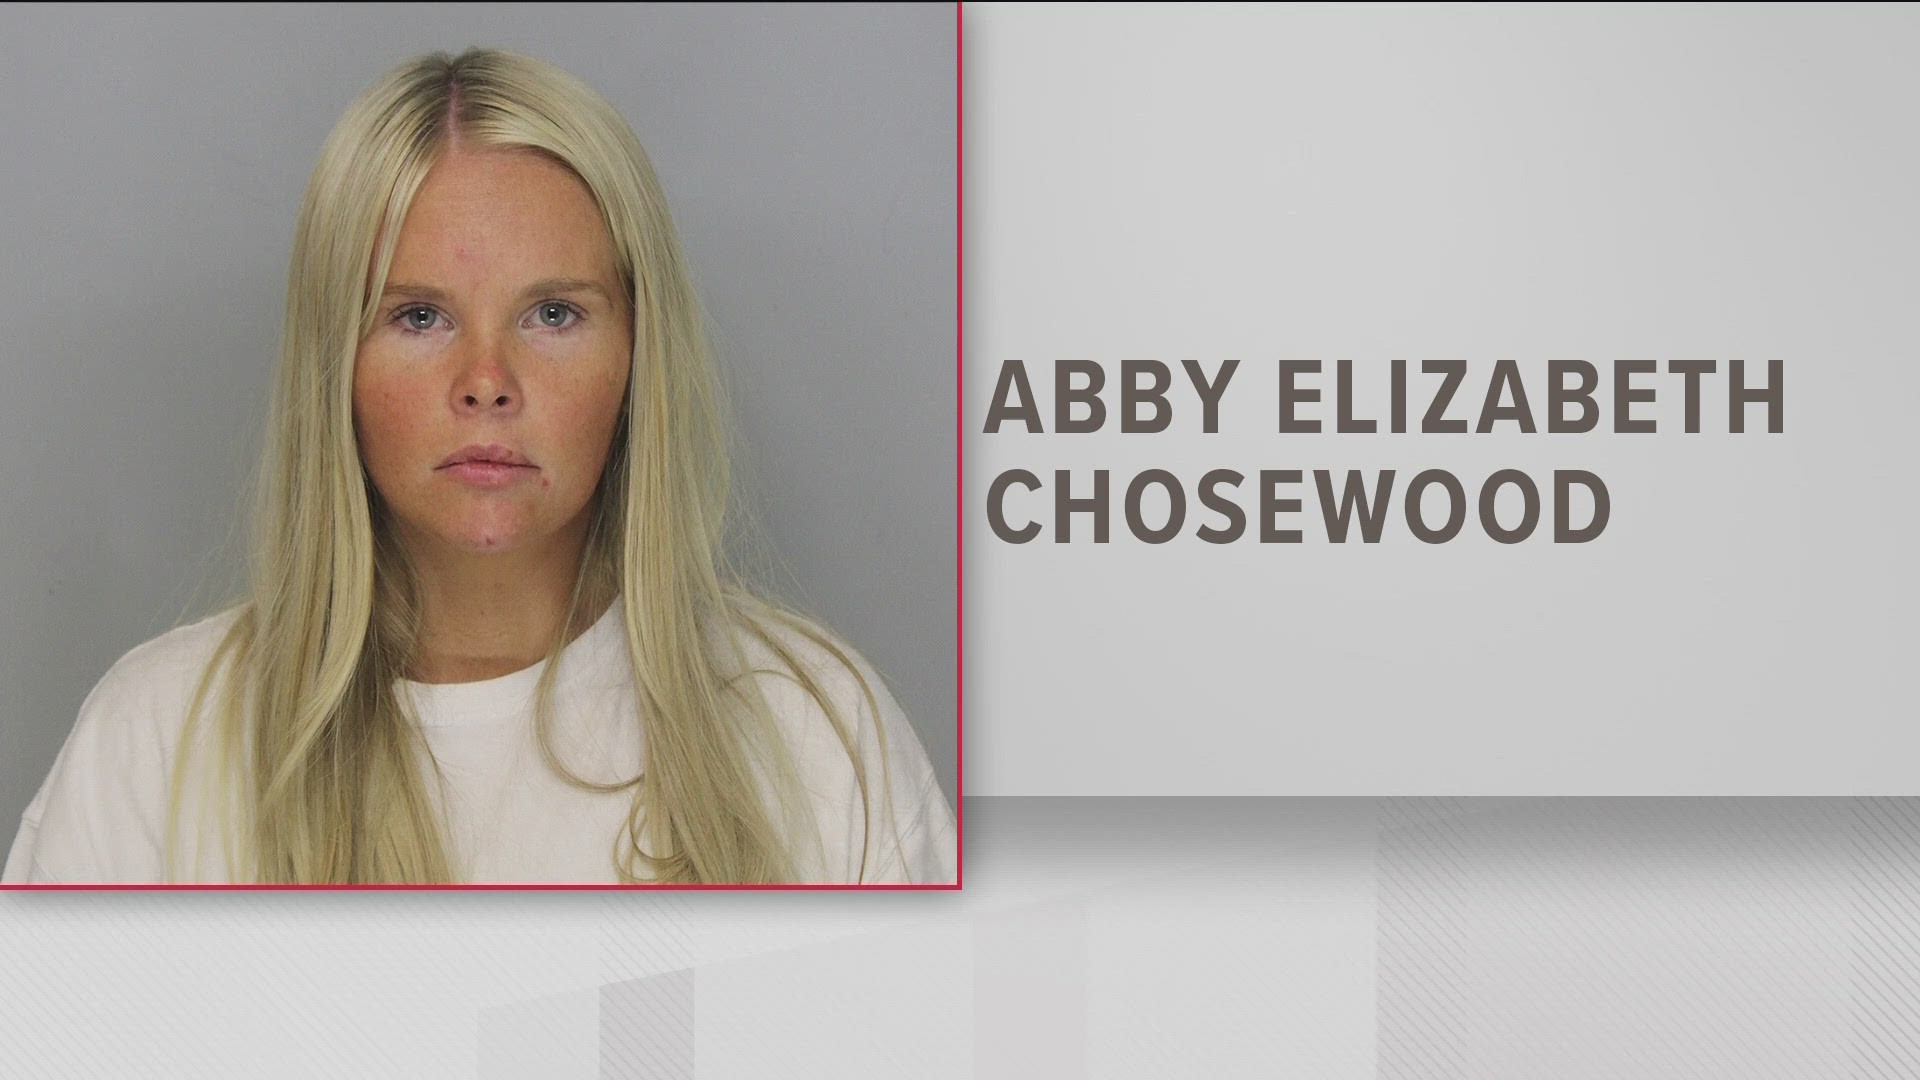 Abby Chosewood is facing charges of felony aggravated assault and felony cruelty to children.